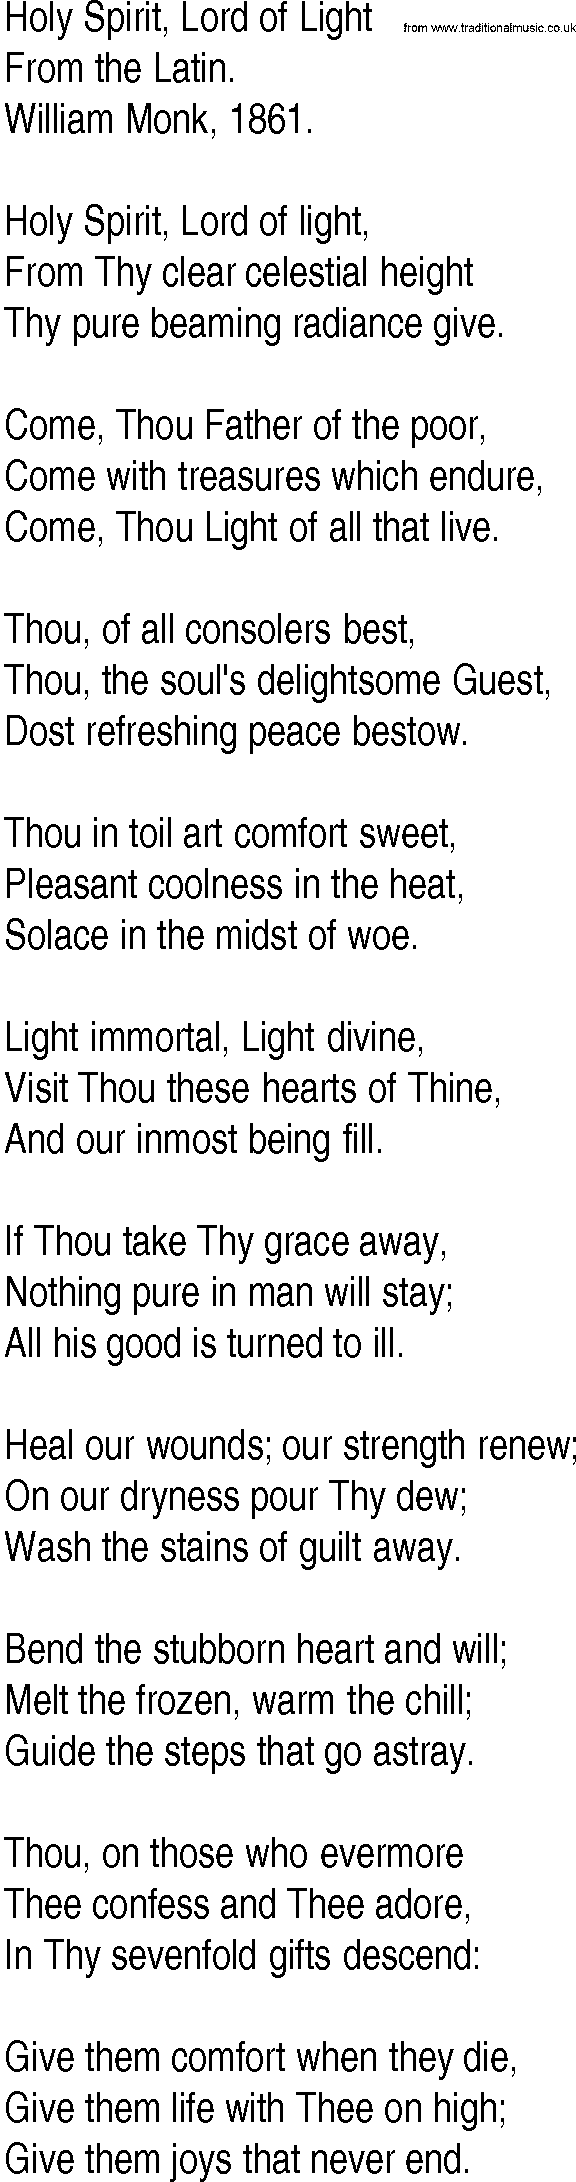 Hymn and Gospel Song: Holy Spirit, Lord of Light by From the Latin lyrics